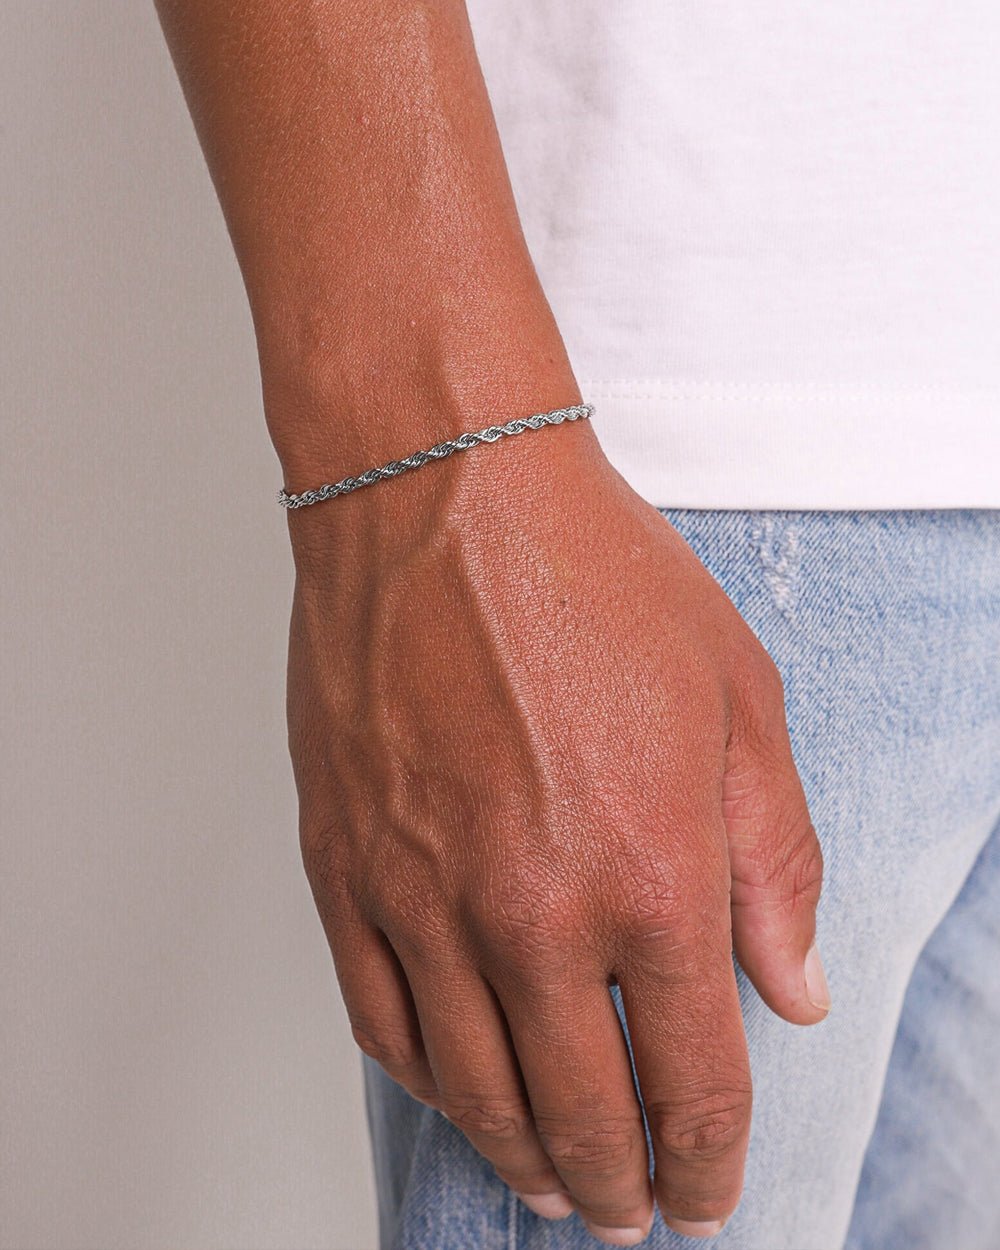 CLEAN ROPE BRACELET. - 3MM WHITE GOLD - Drippy Amsterdam